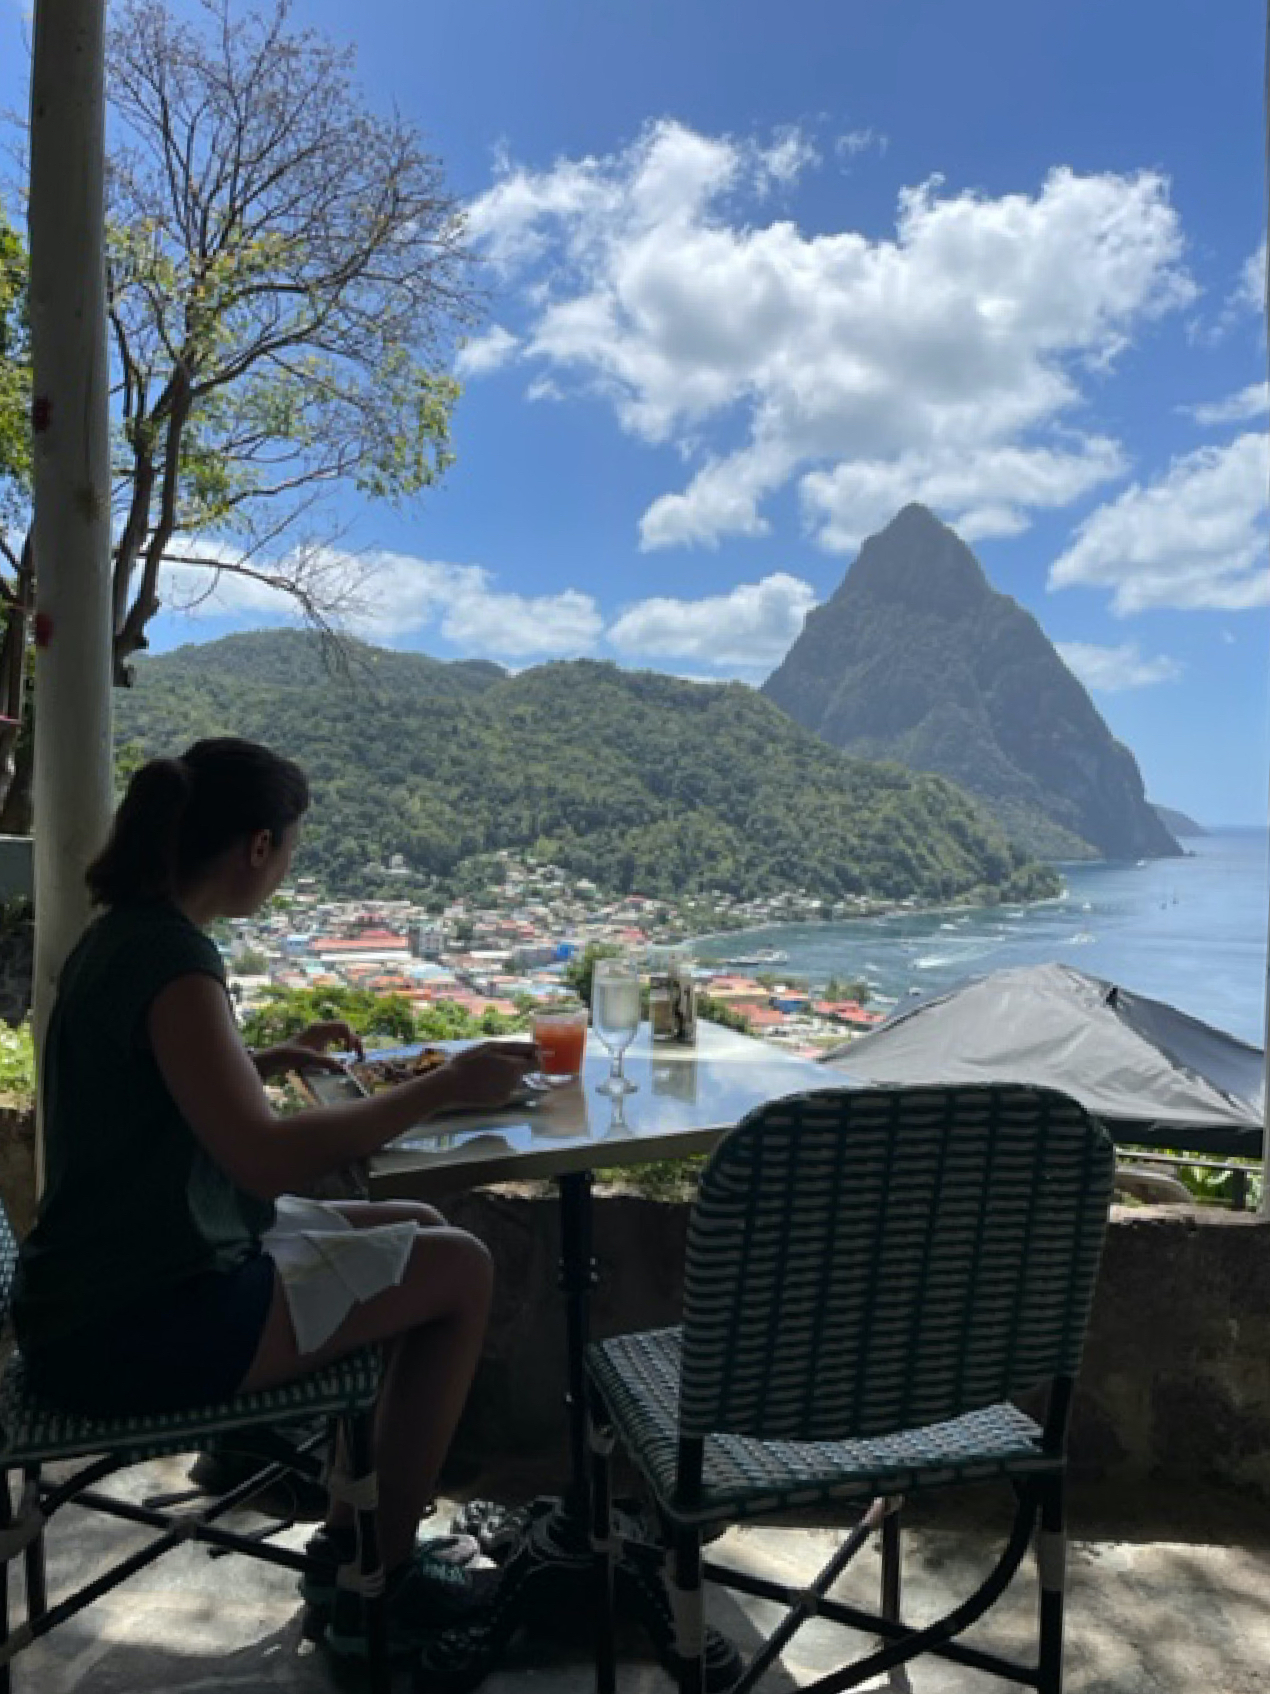 A guest enjoys open-air dining on local Creole cuisine at the Green Fig Resort with Petit Piton in the distance beyond Soufriere, St. Lucia.